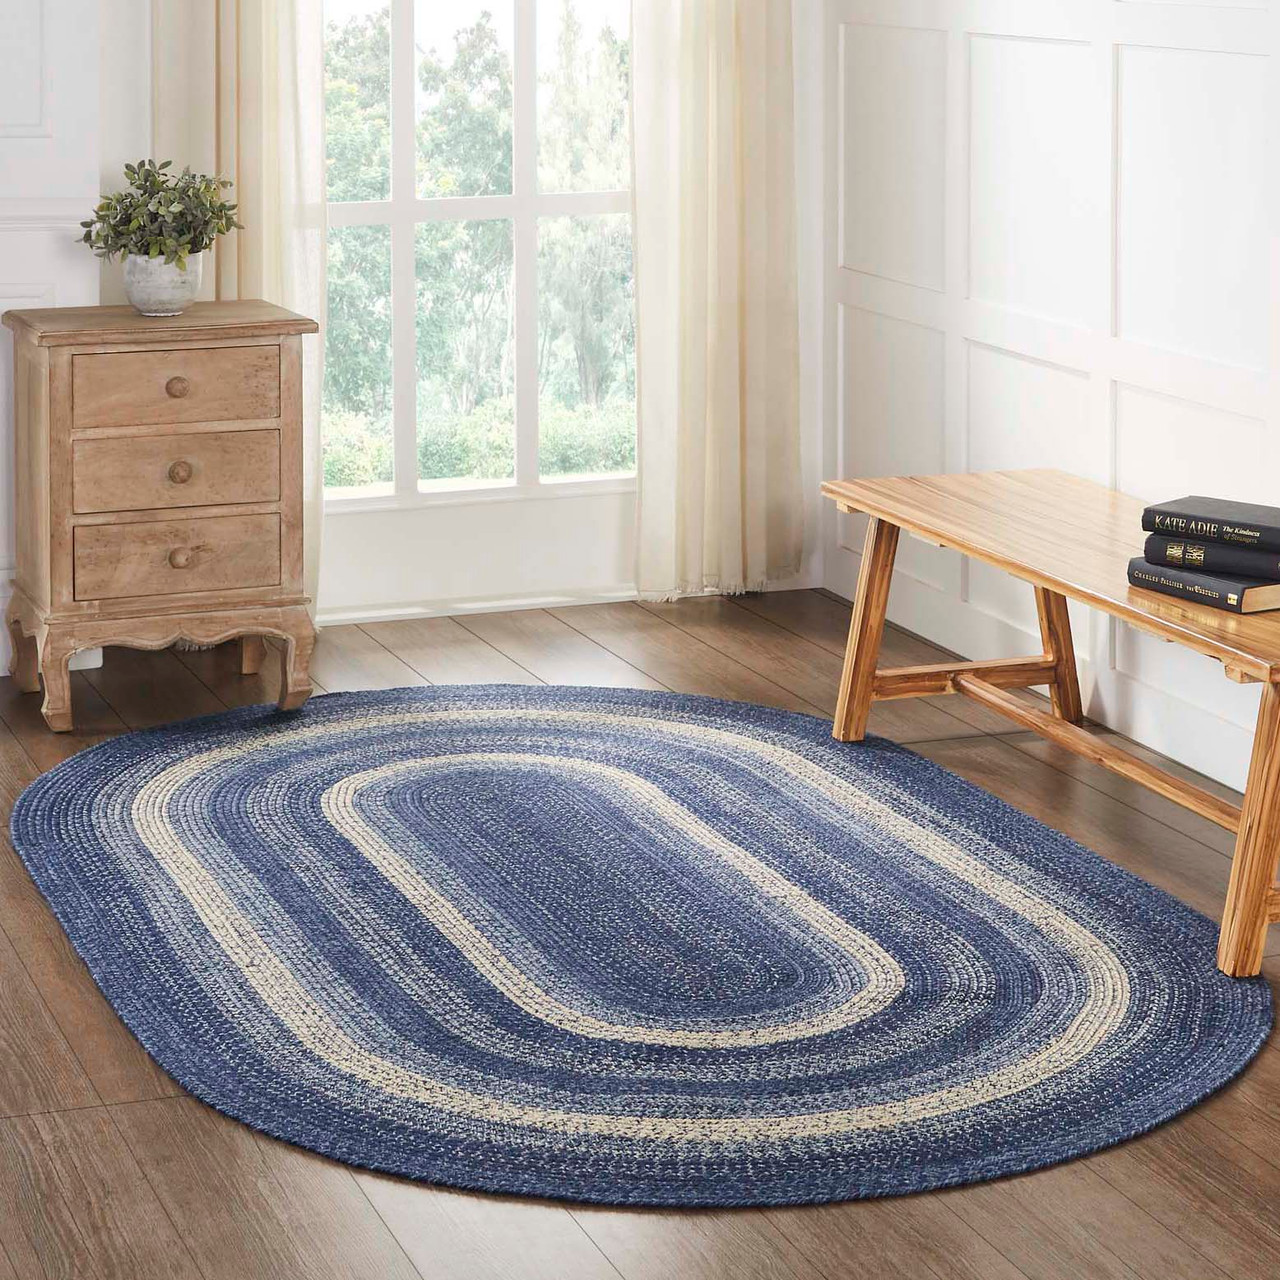 VHC Brands Braided Area Rug - Great Falls Blue Jute Rug Oval w/ Pad 60x96